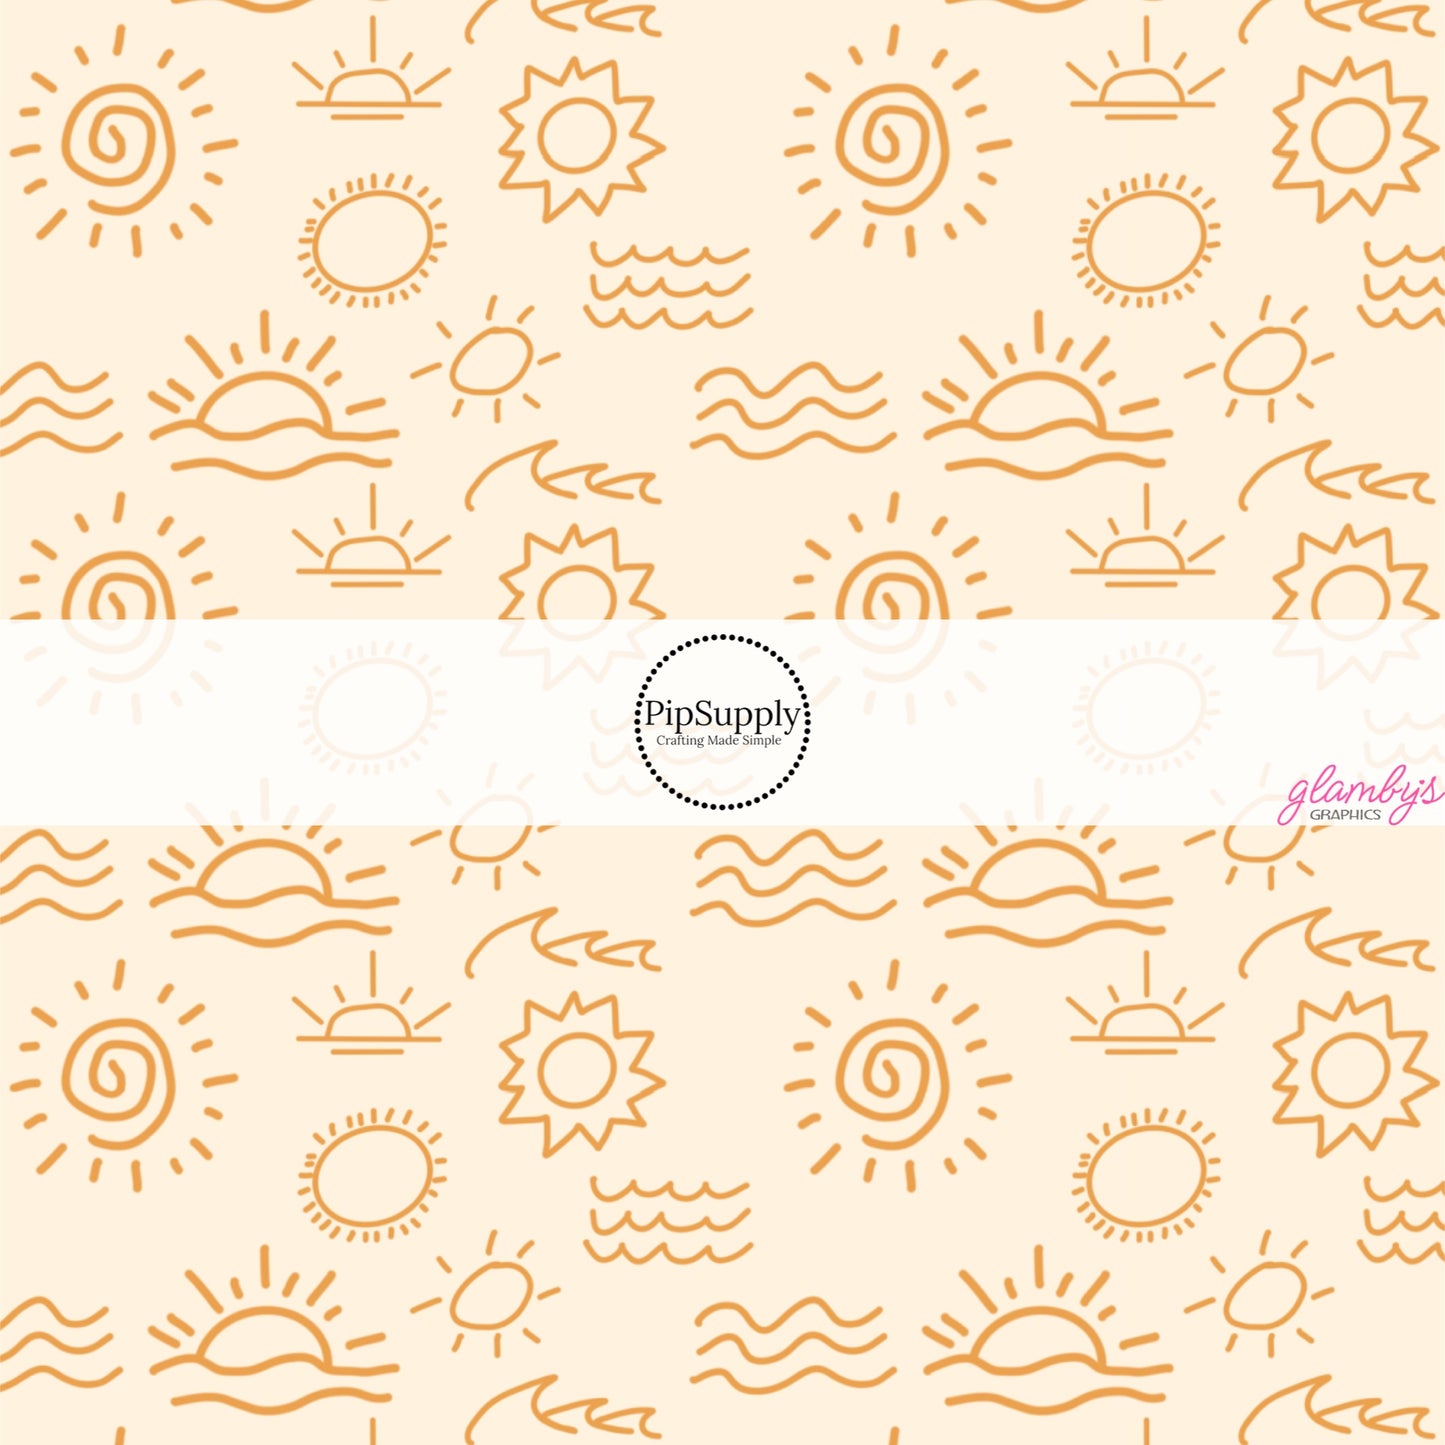 This tropical fabric by the yard features sketch of waves and suns on cream. This fun summer themed fabric can be used for all your sewing and crafting needs!